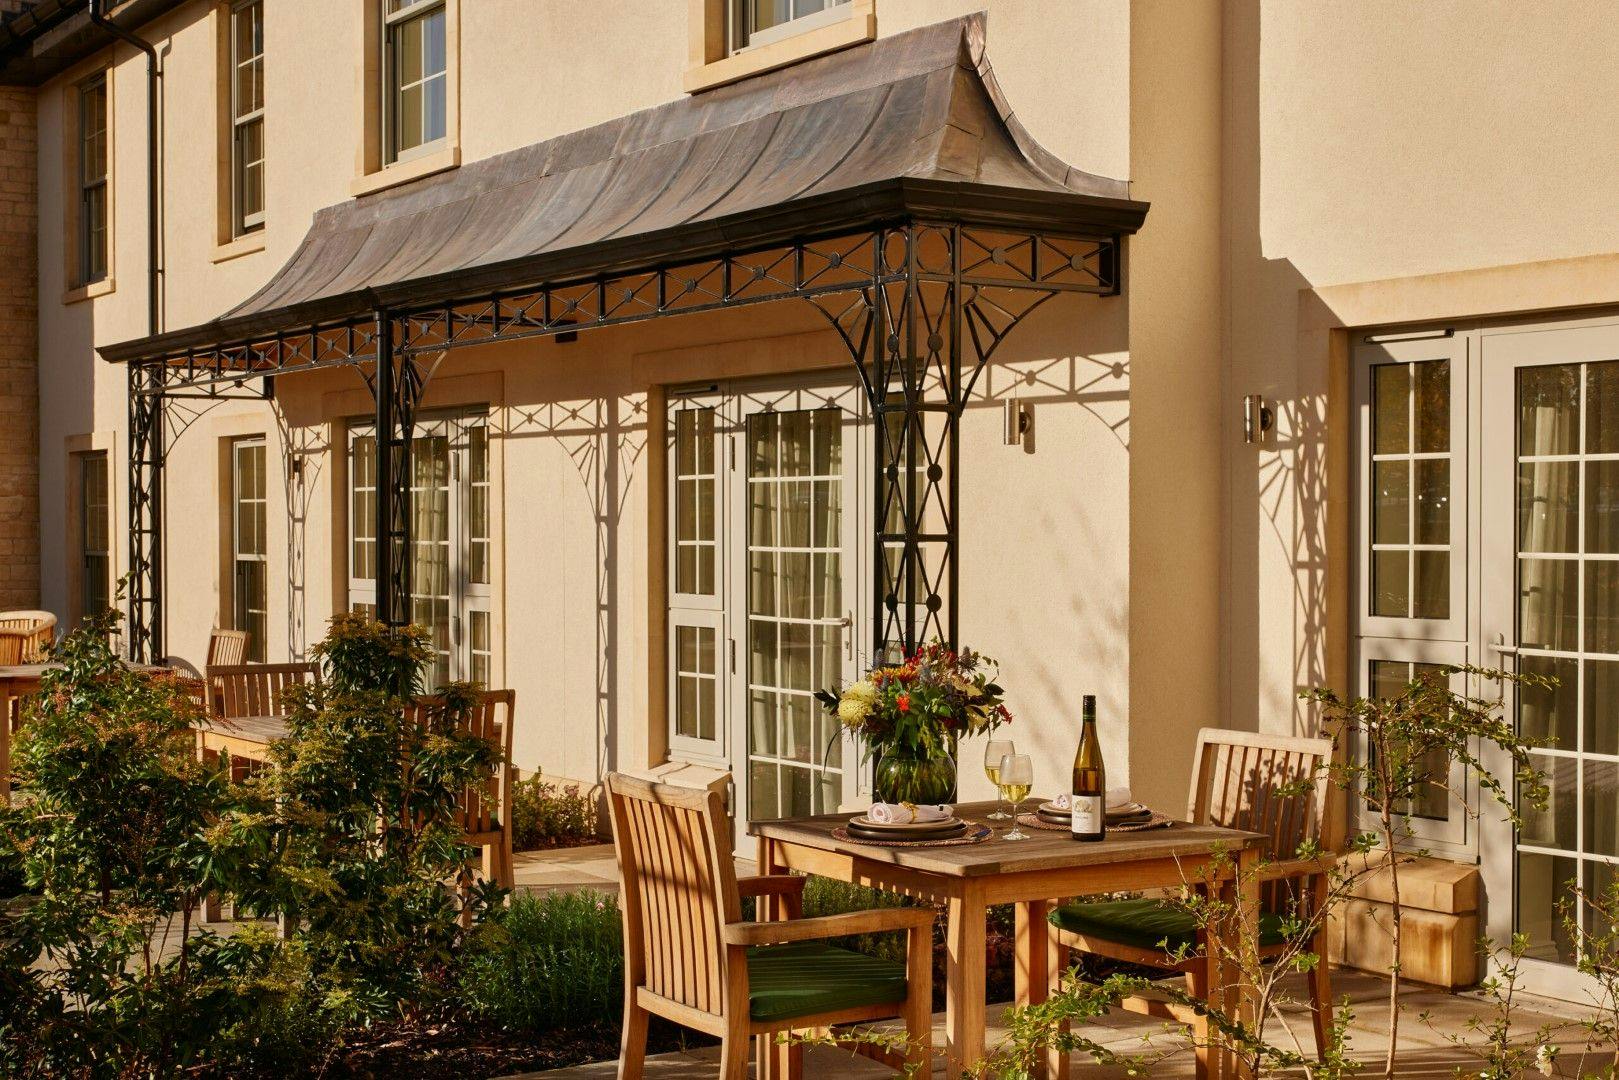 Exterior of Midford Manor Care Home in Bath, Somerset